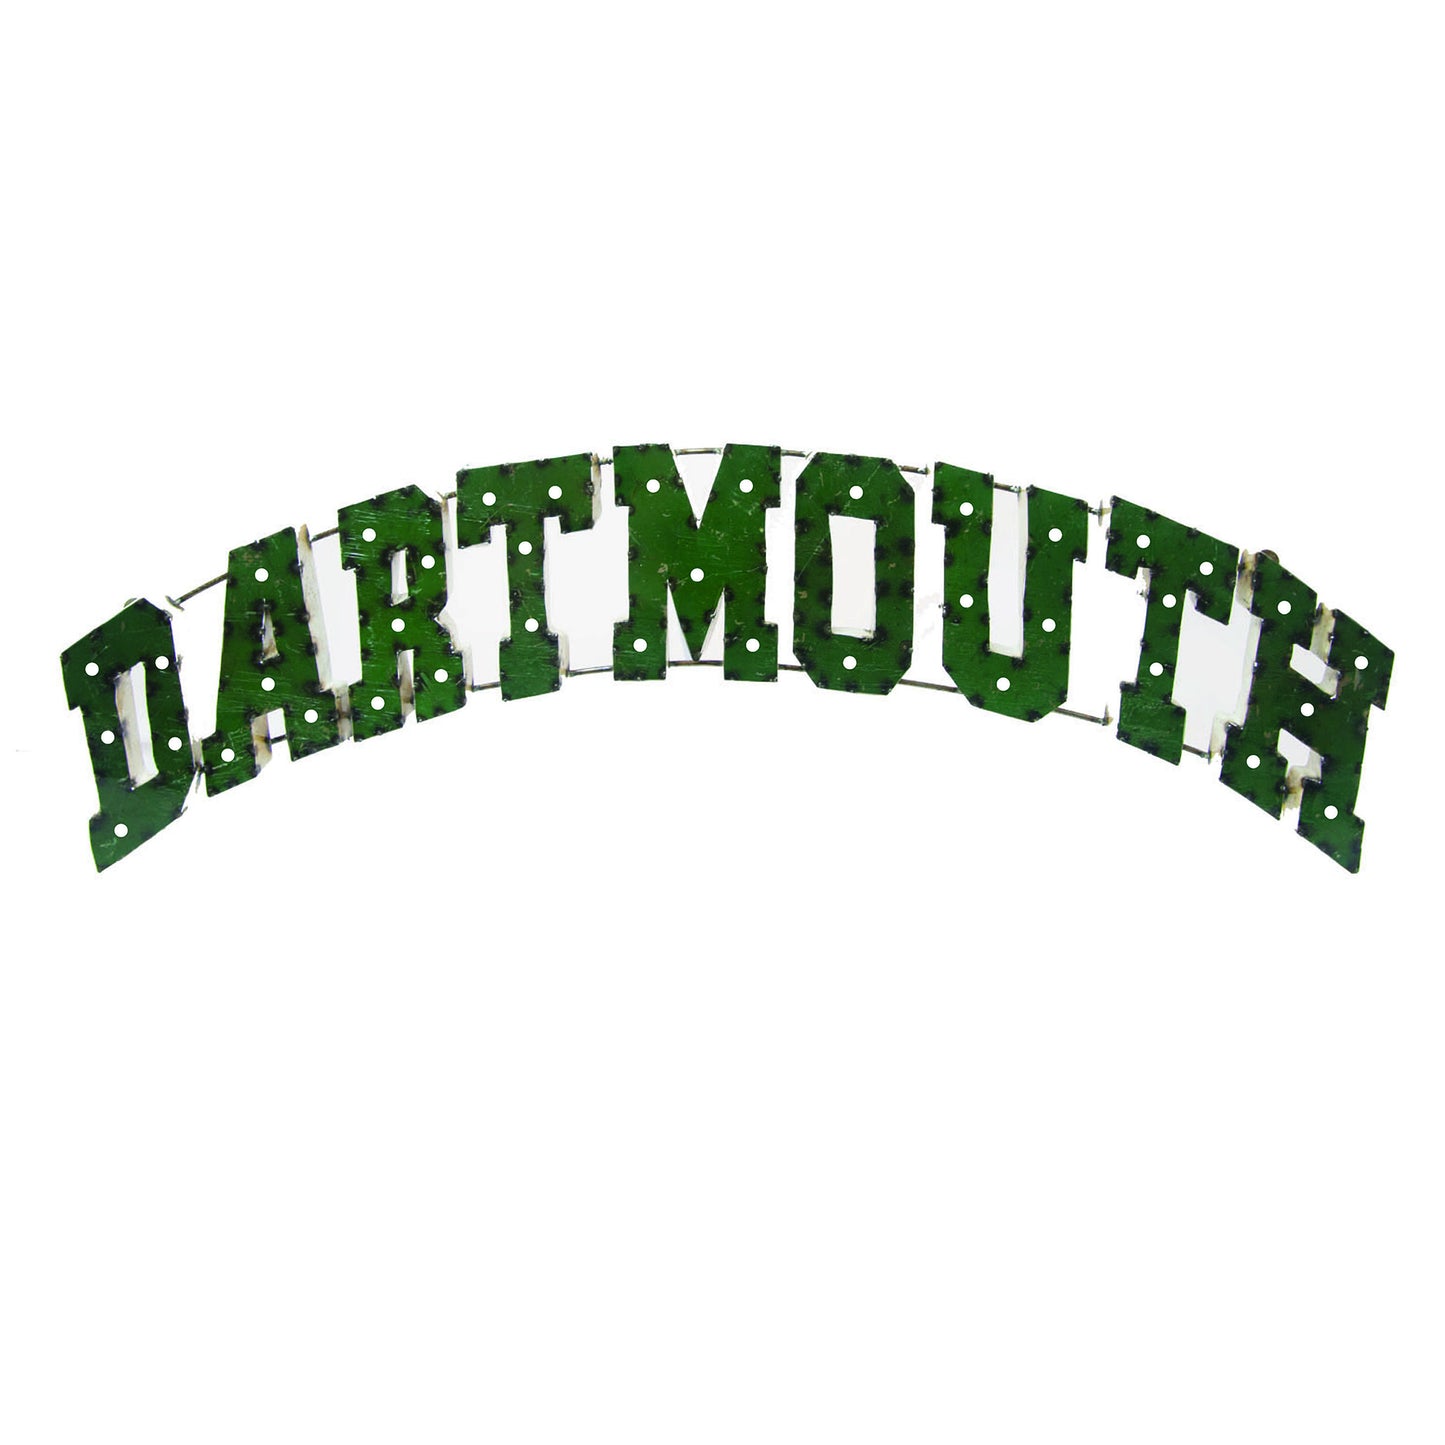 Dartmouth College "Dartmouth" Lighted Recycled Metal Wall Decor